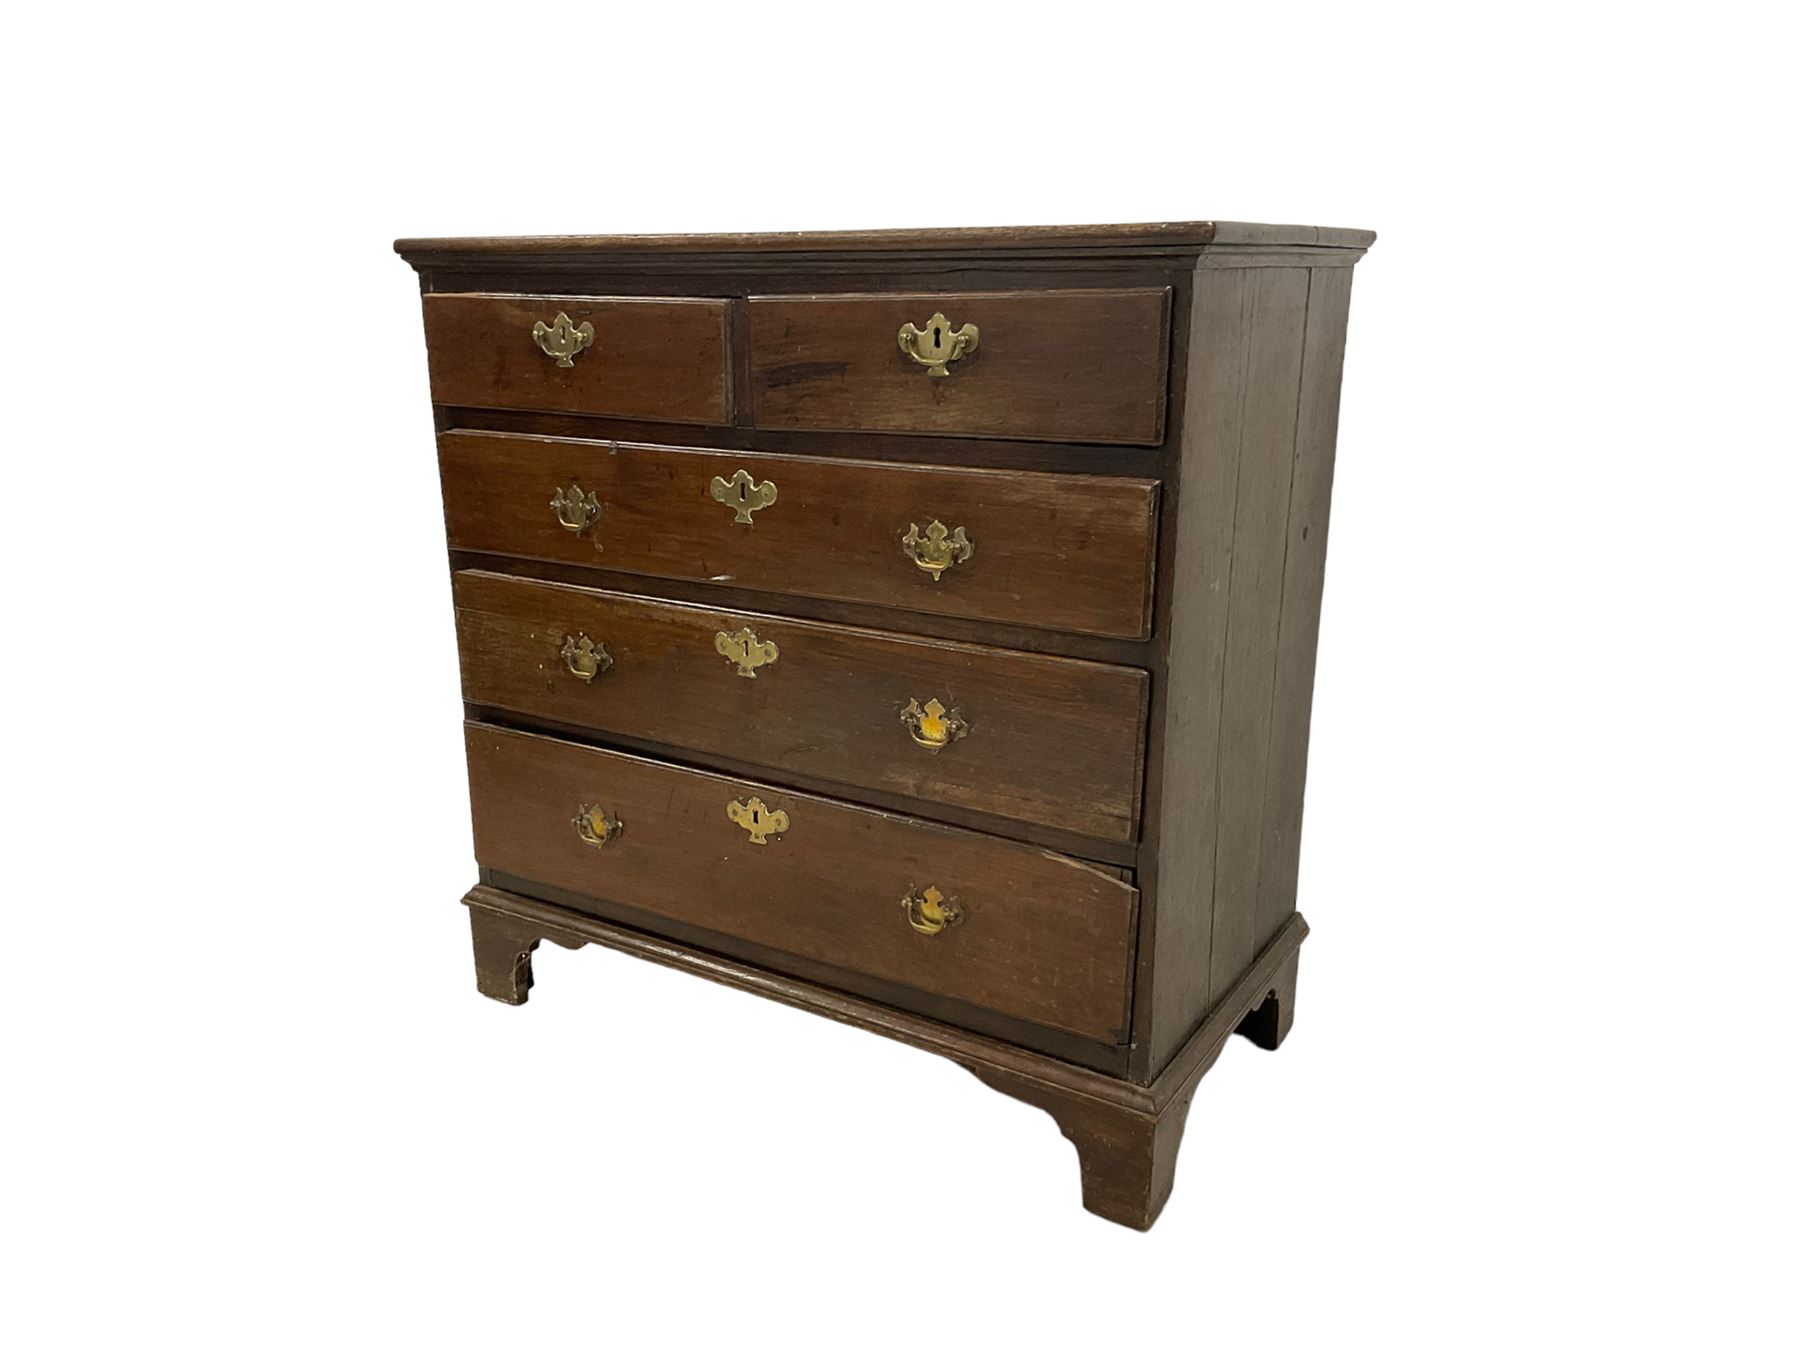 George III oak straight-front chest - Image 3 of 6